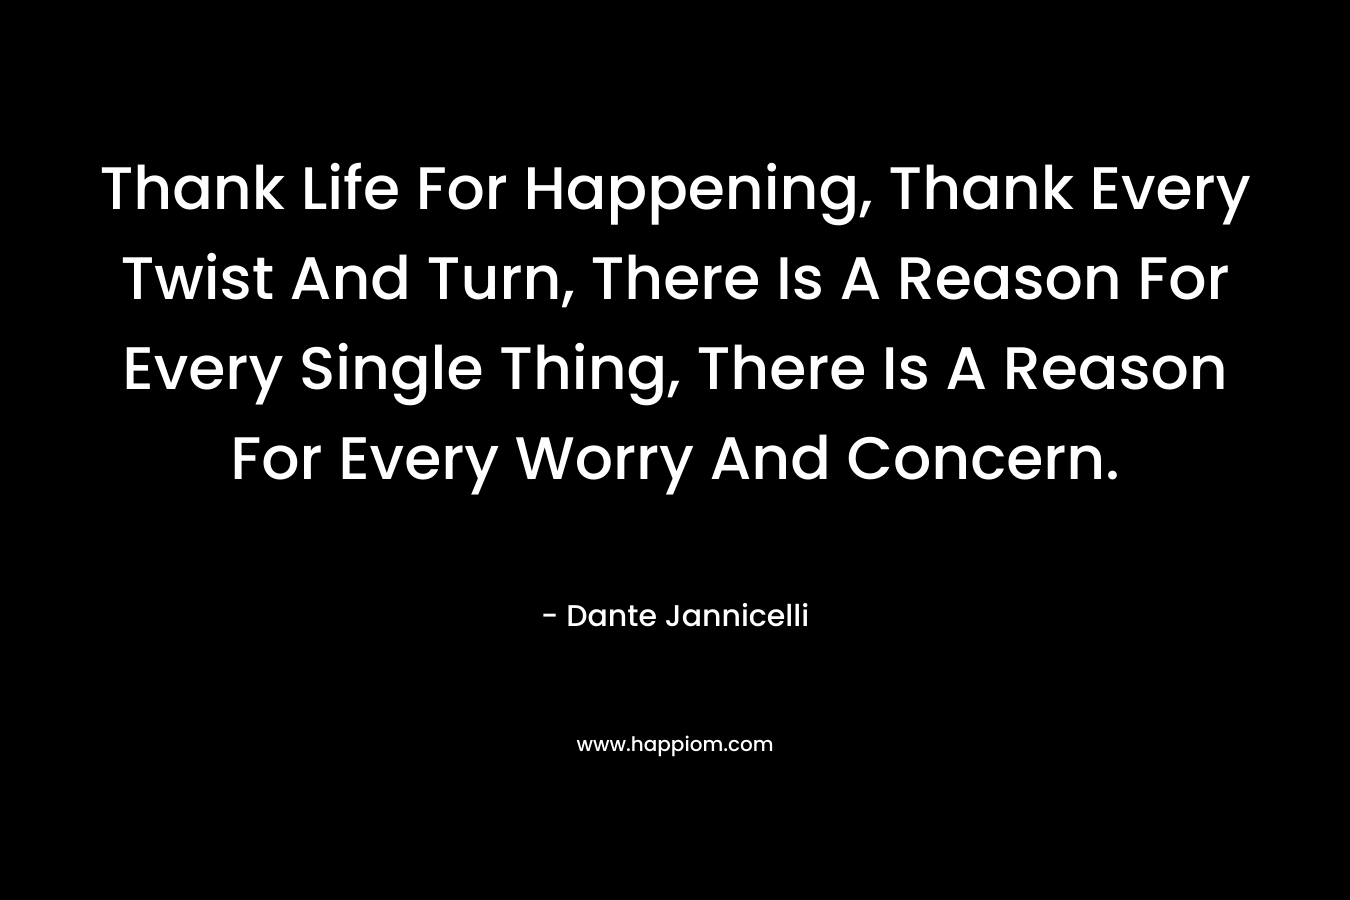 Thank Life For Happening, Thank Every Twist And Turn, There Is A Reason For Every Single Thing, There Is A Reason For Every Worry And Concern.